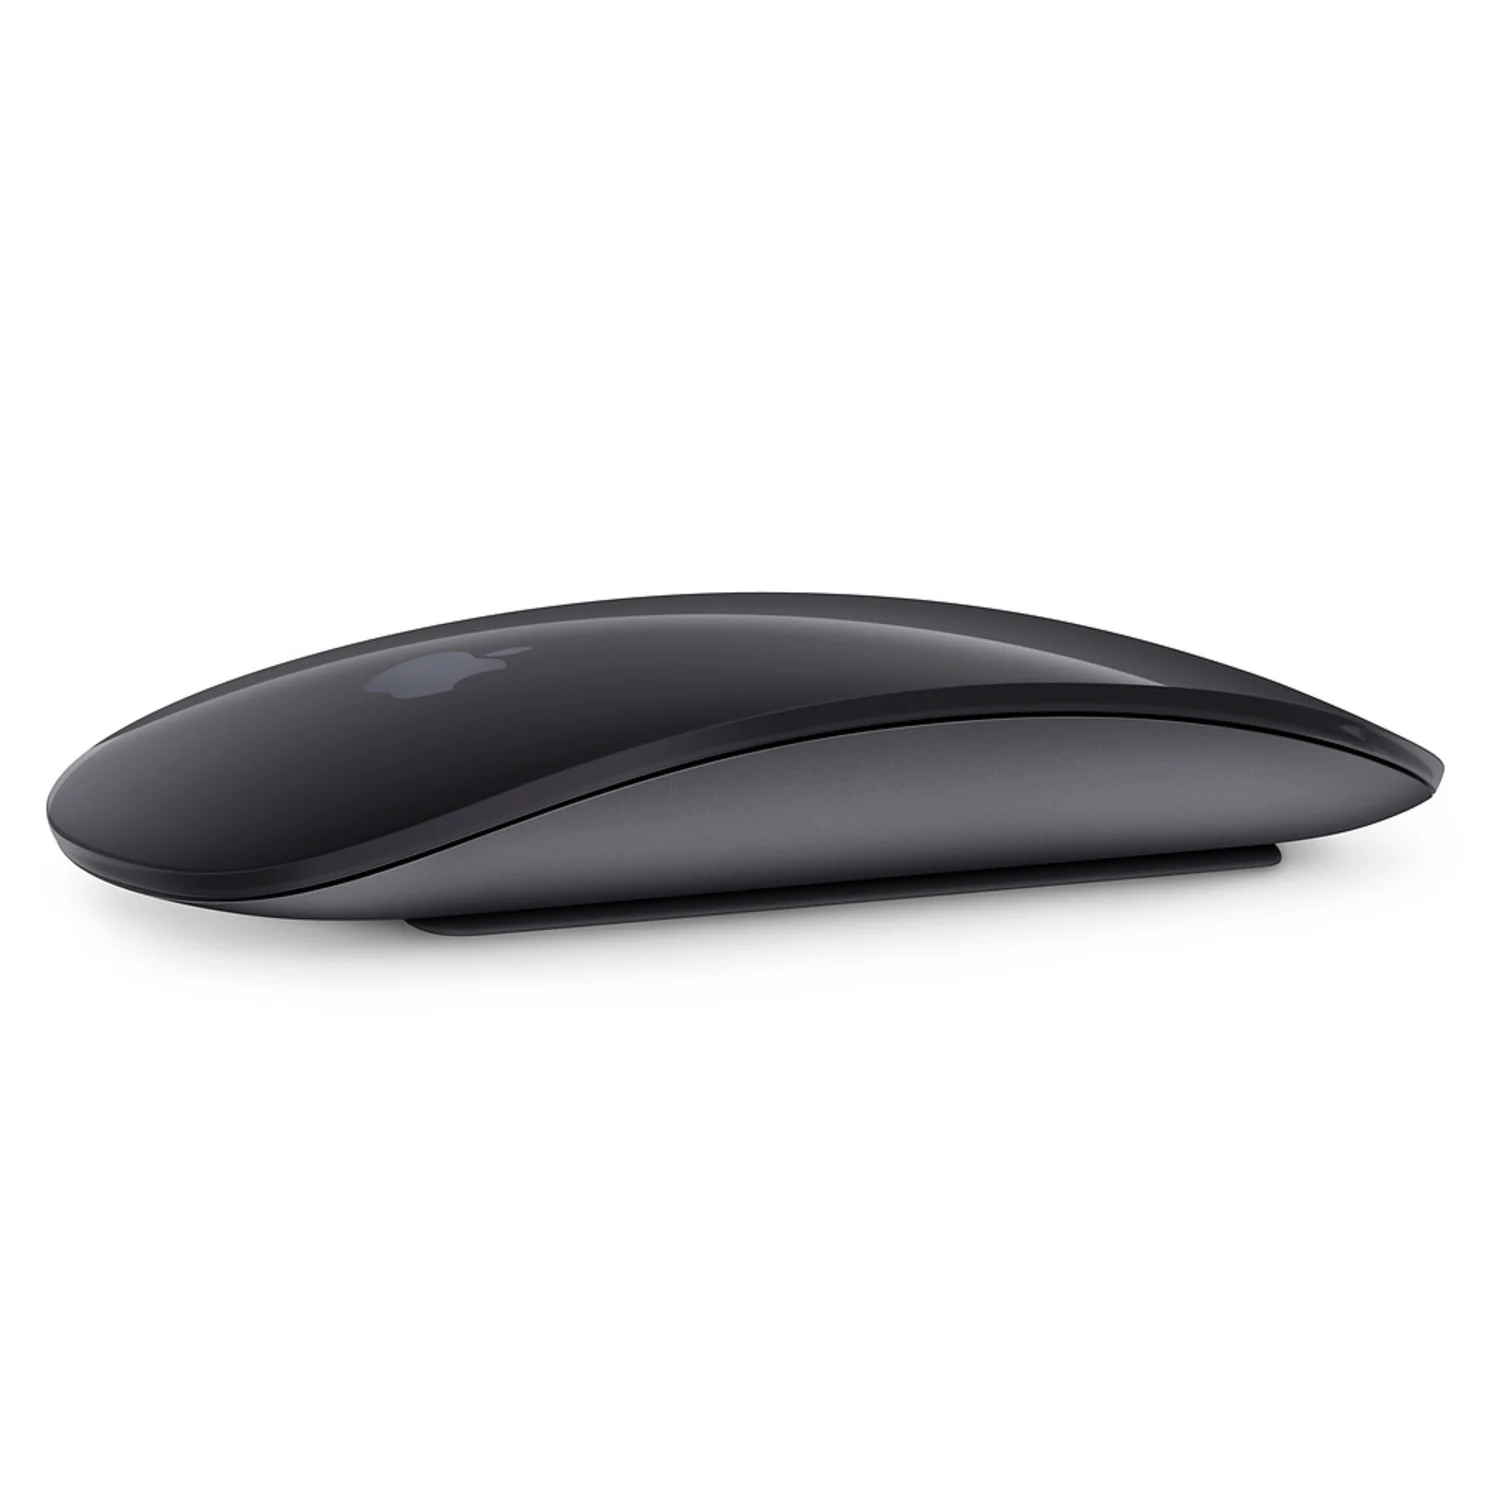 Mouse Apple Magic 2 MRME2BE/A Bluetooth - Space gray